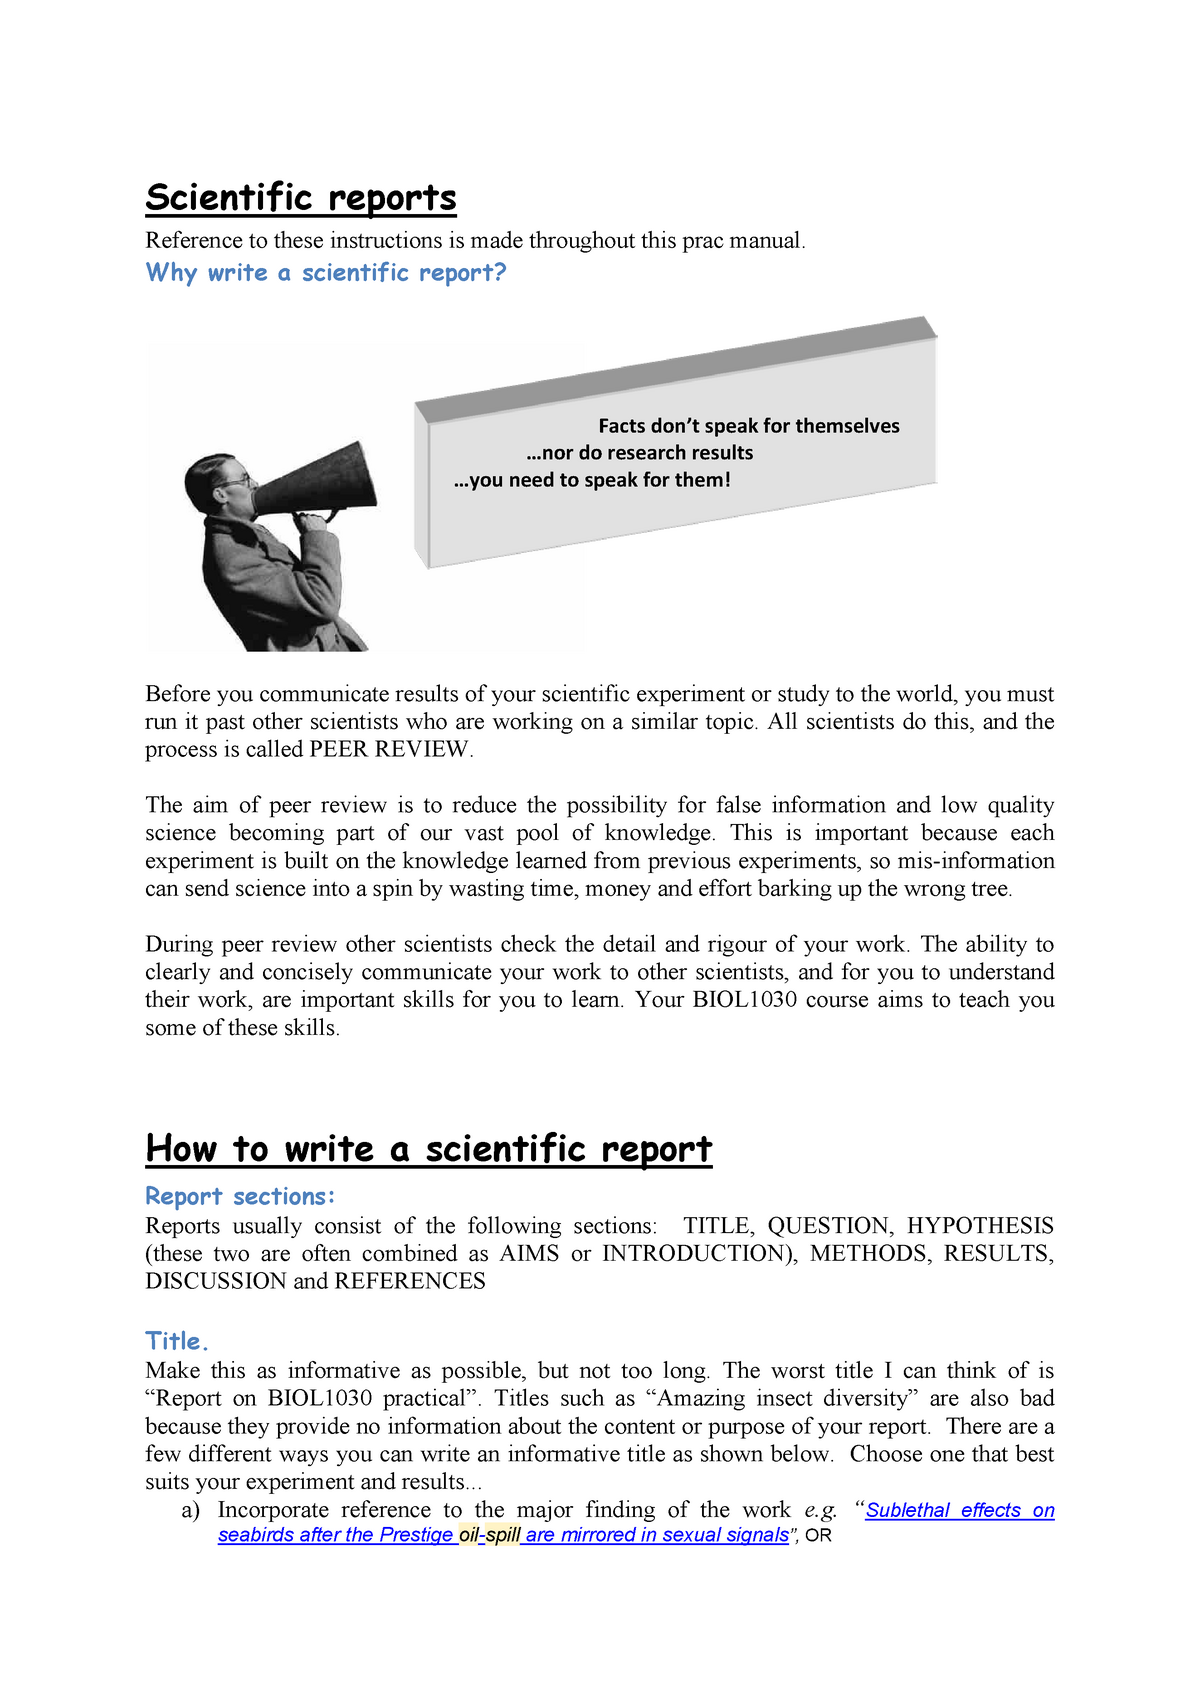 How to write a scientific report - Scientific reports Reference to